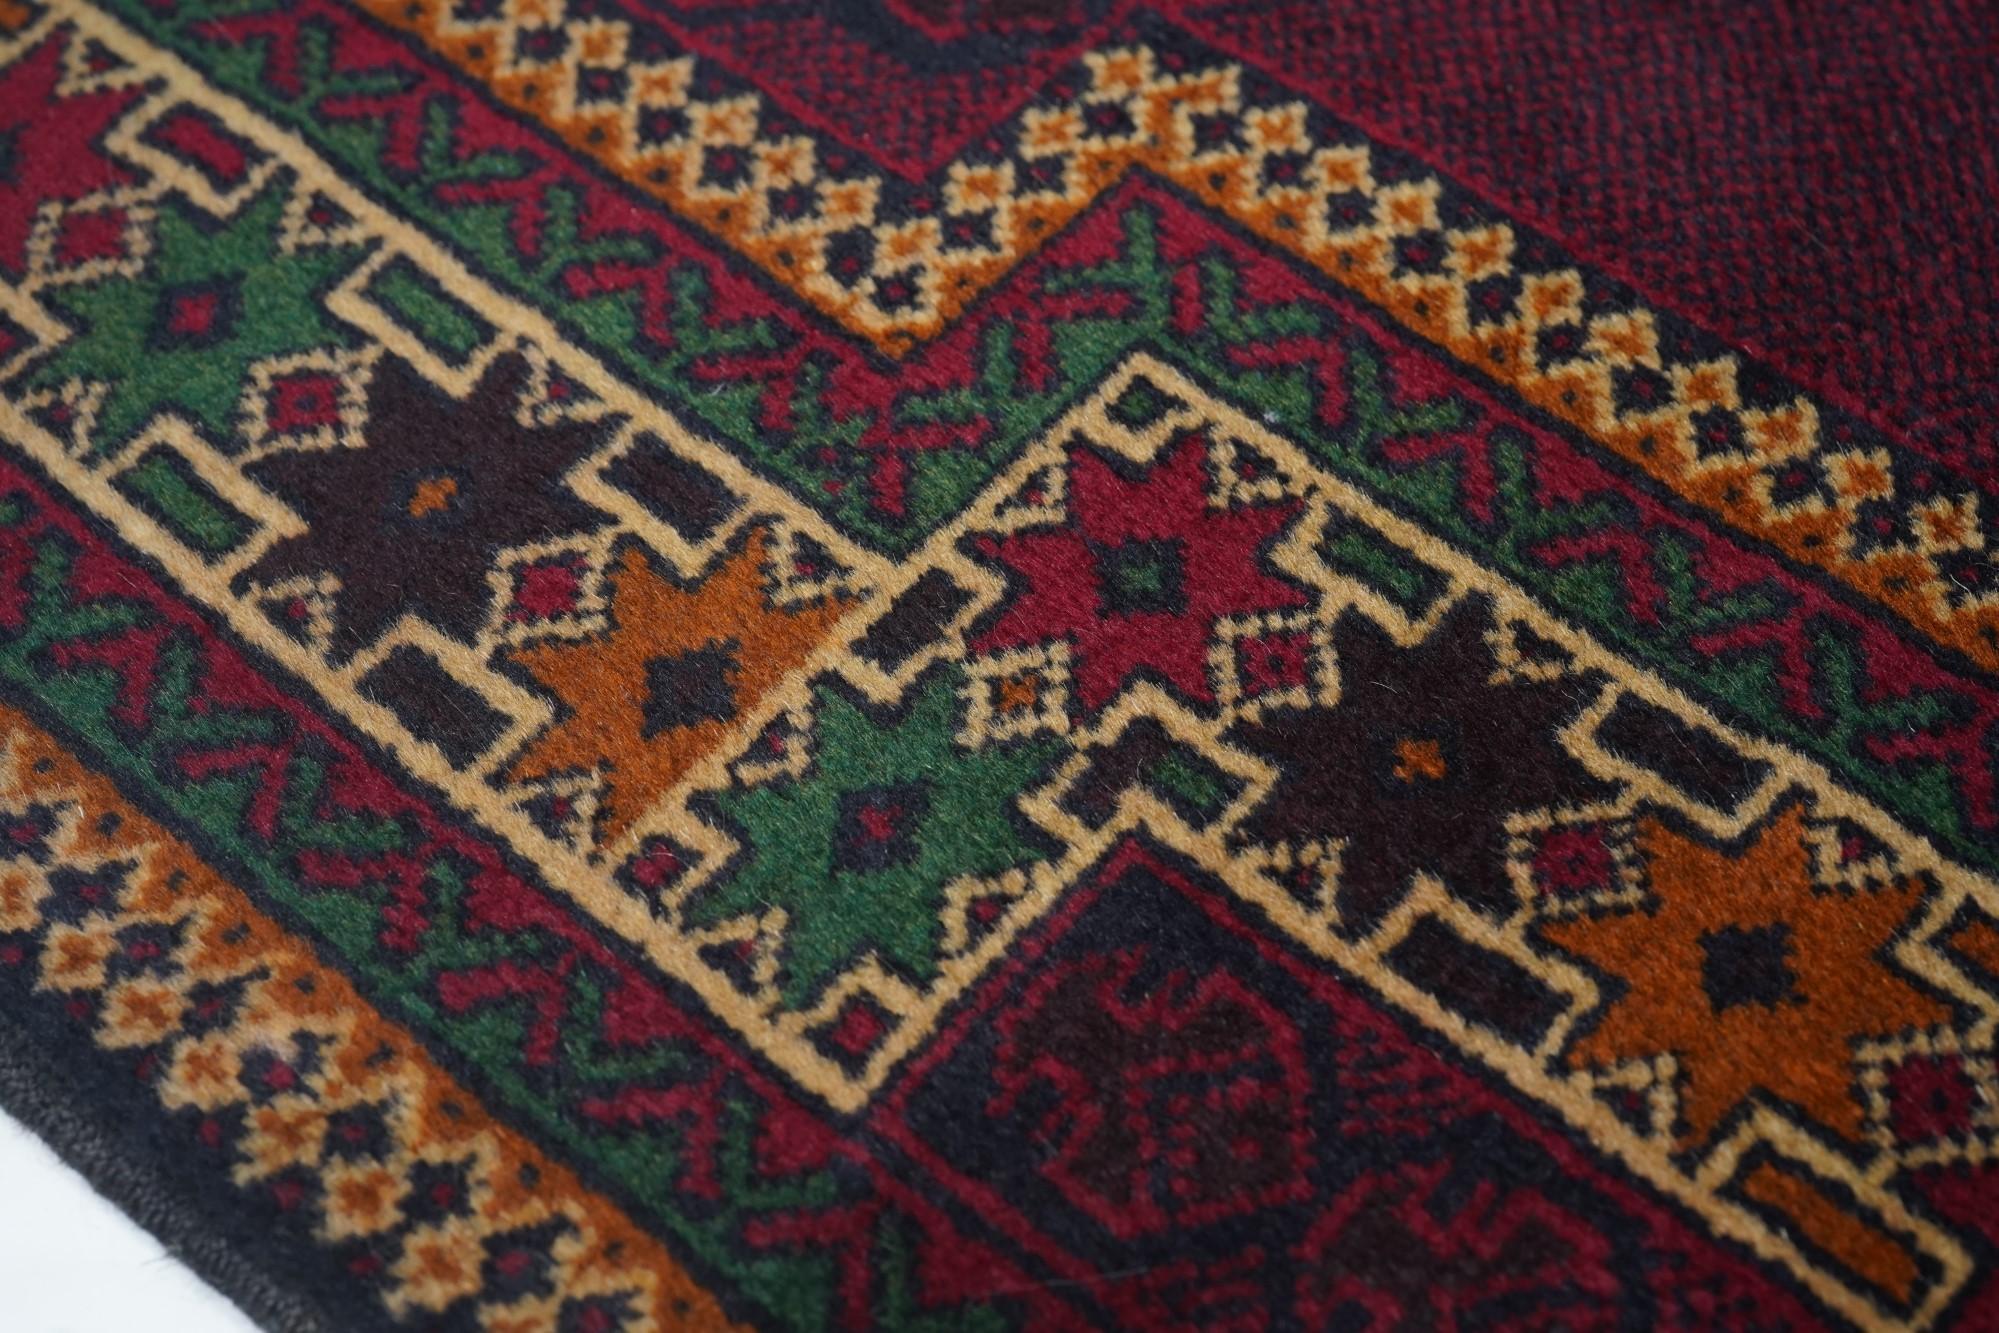 Vintage Balouch Rug 2'9'' x 4'7'' In Excellent Condition For Sale In New York, NY